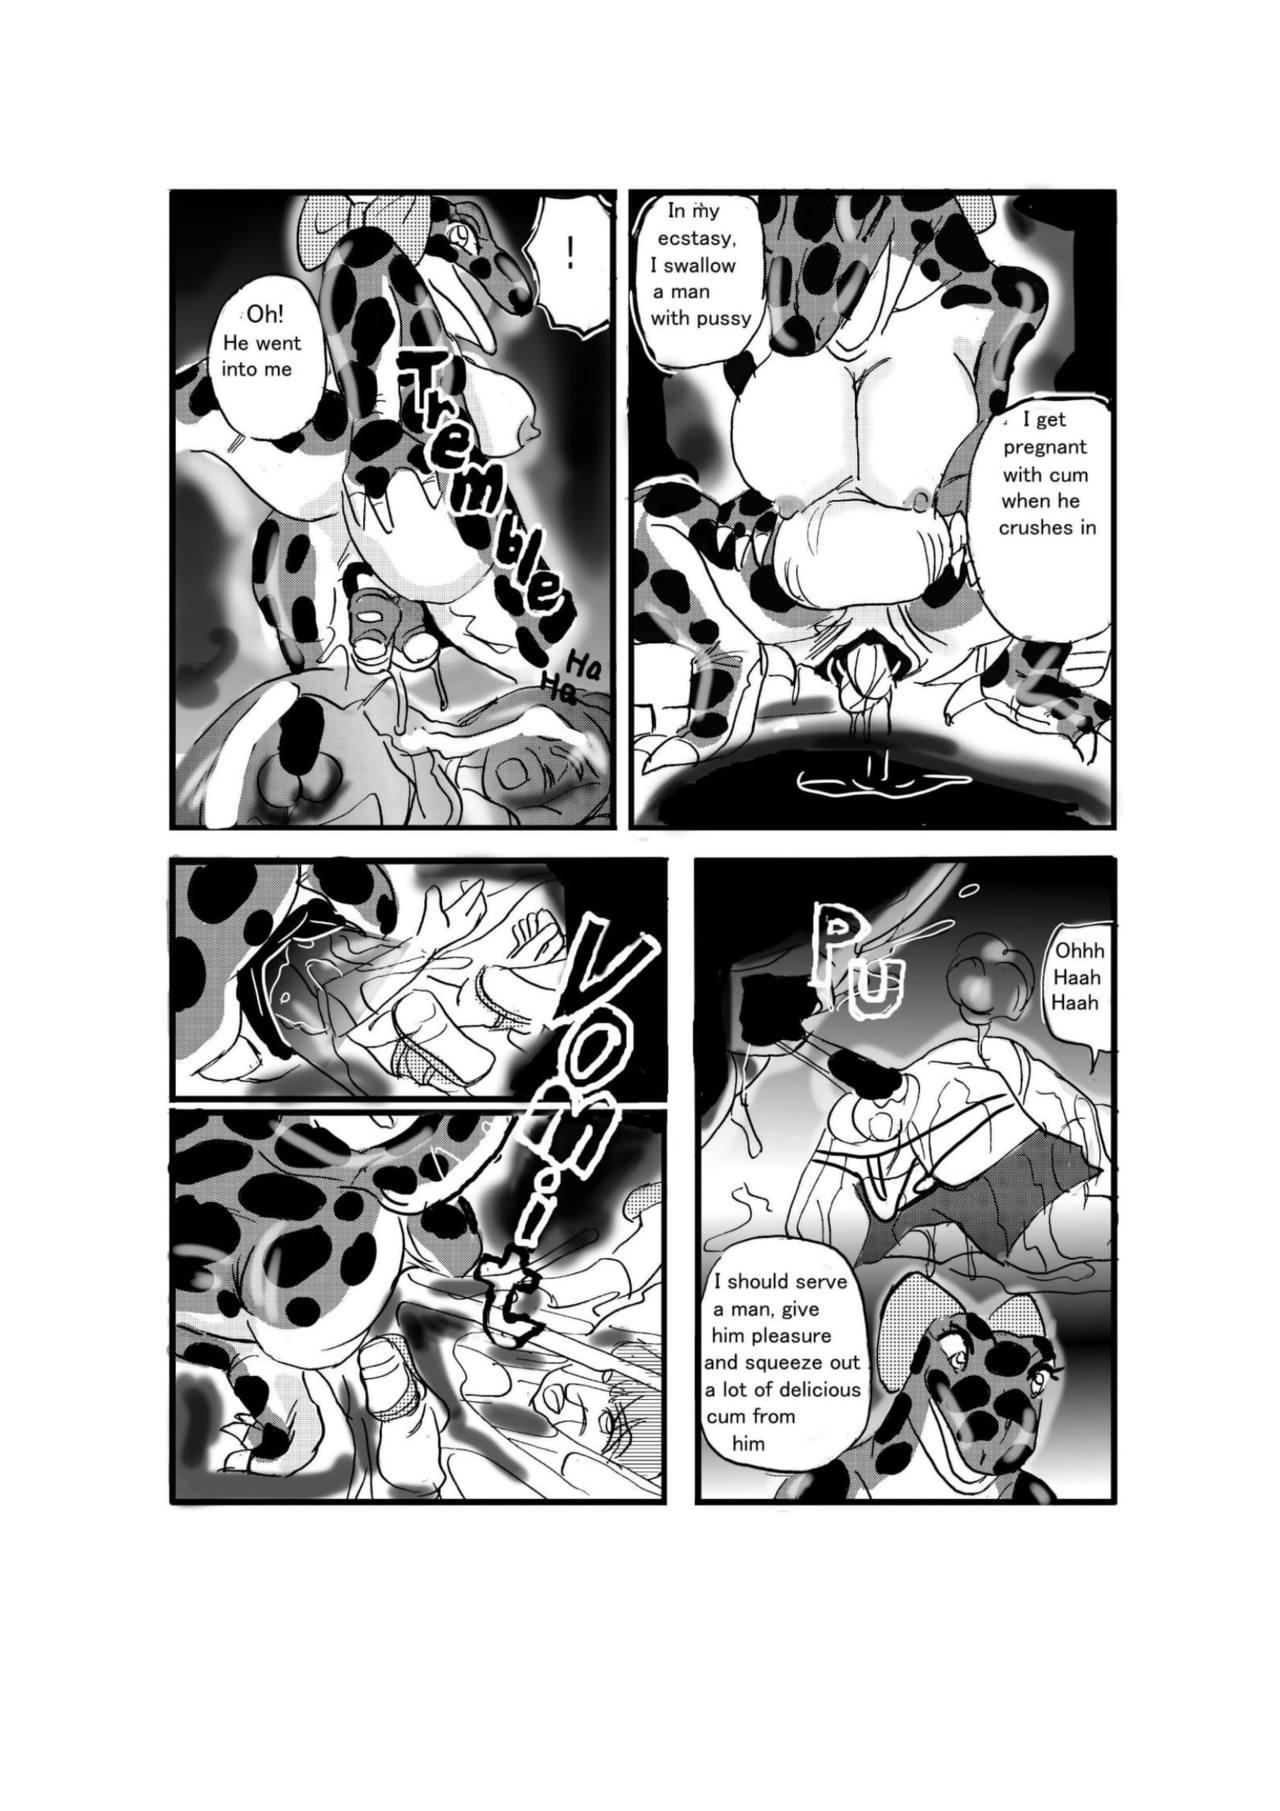 Ass Fetish Swallowed Whole vol.2 Waniko + What's Digestion? - Original Lips - Page 6